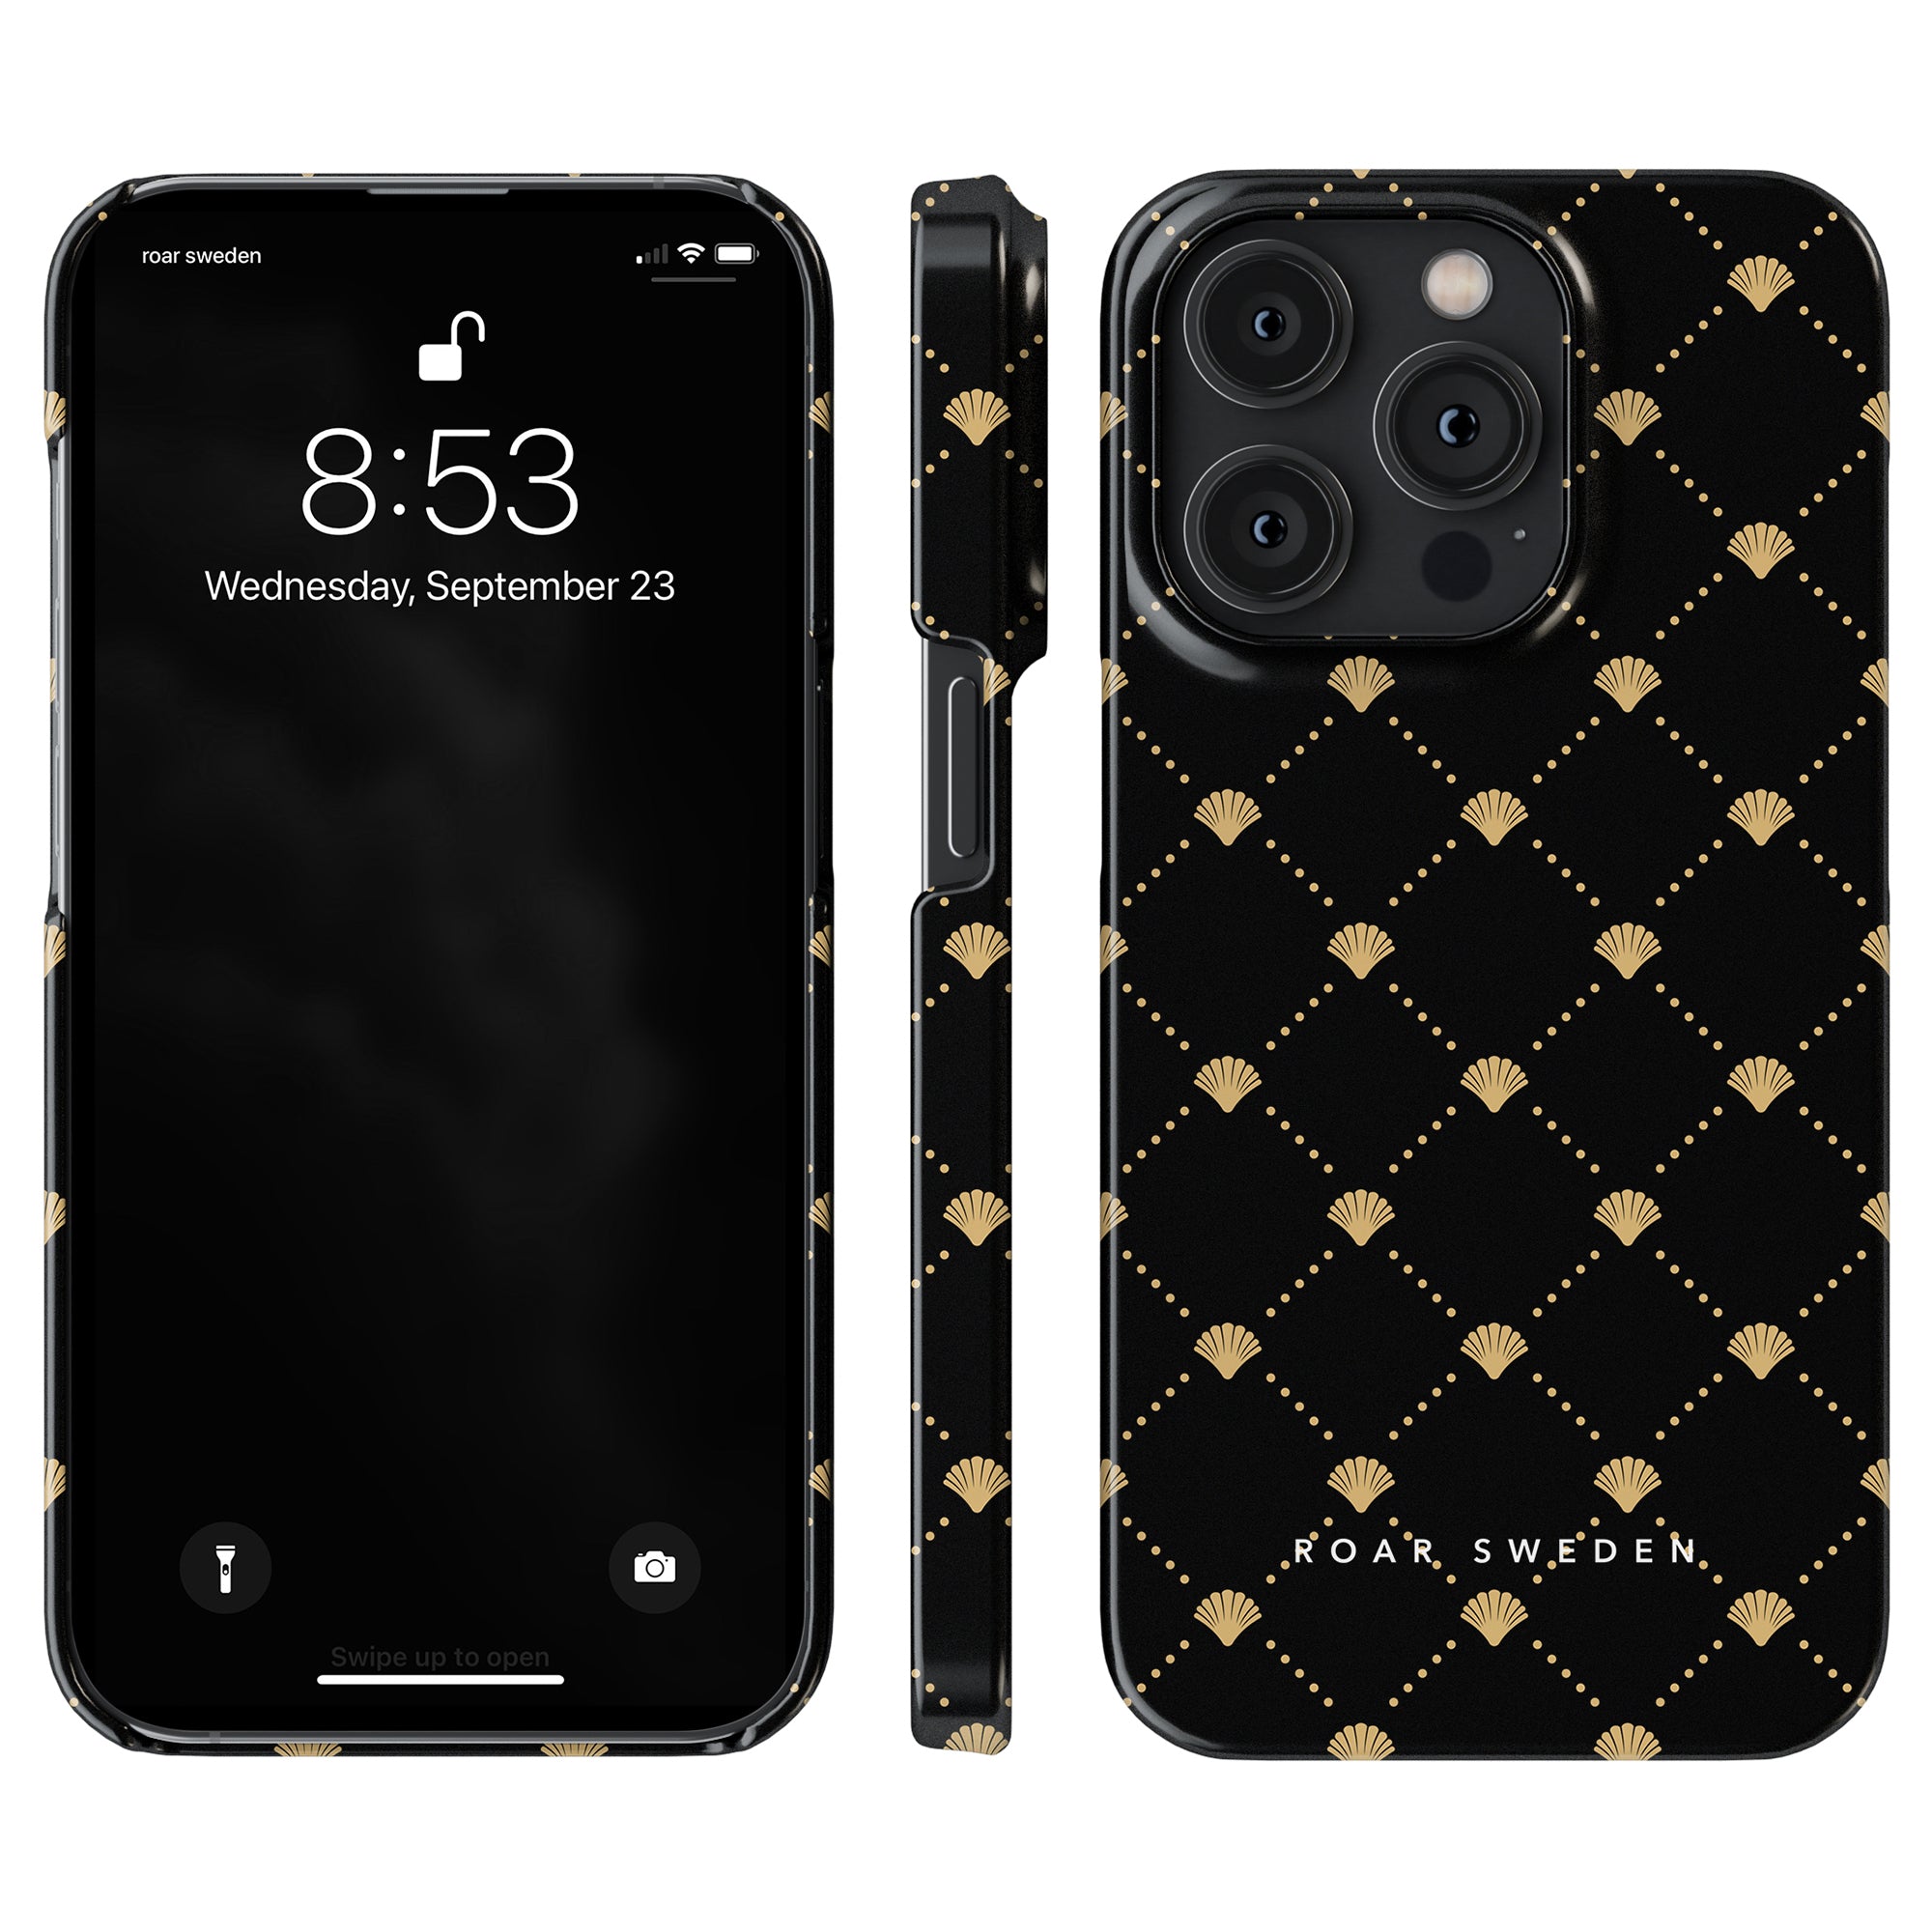 Black iPhone with a lock screen showing the time 8:53 and date Wednesday, September 23. Beside it is a Luxe Shells Black - Slim case from the Ocean Collection, featuring a gold shell pattern and the text "ROAR SWEDEN" at the bottom.